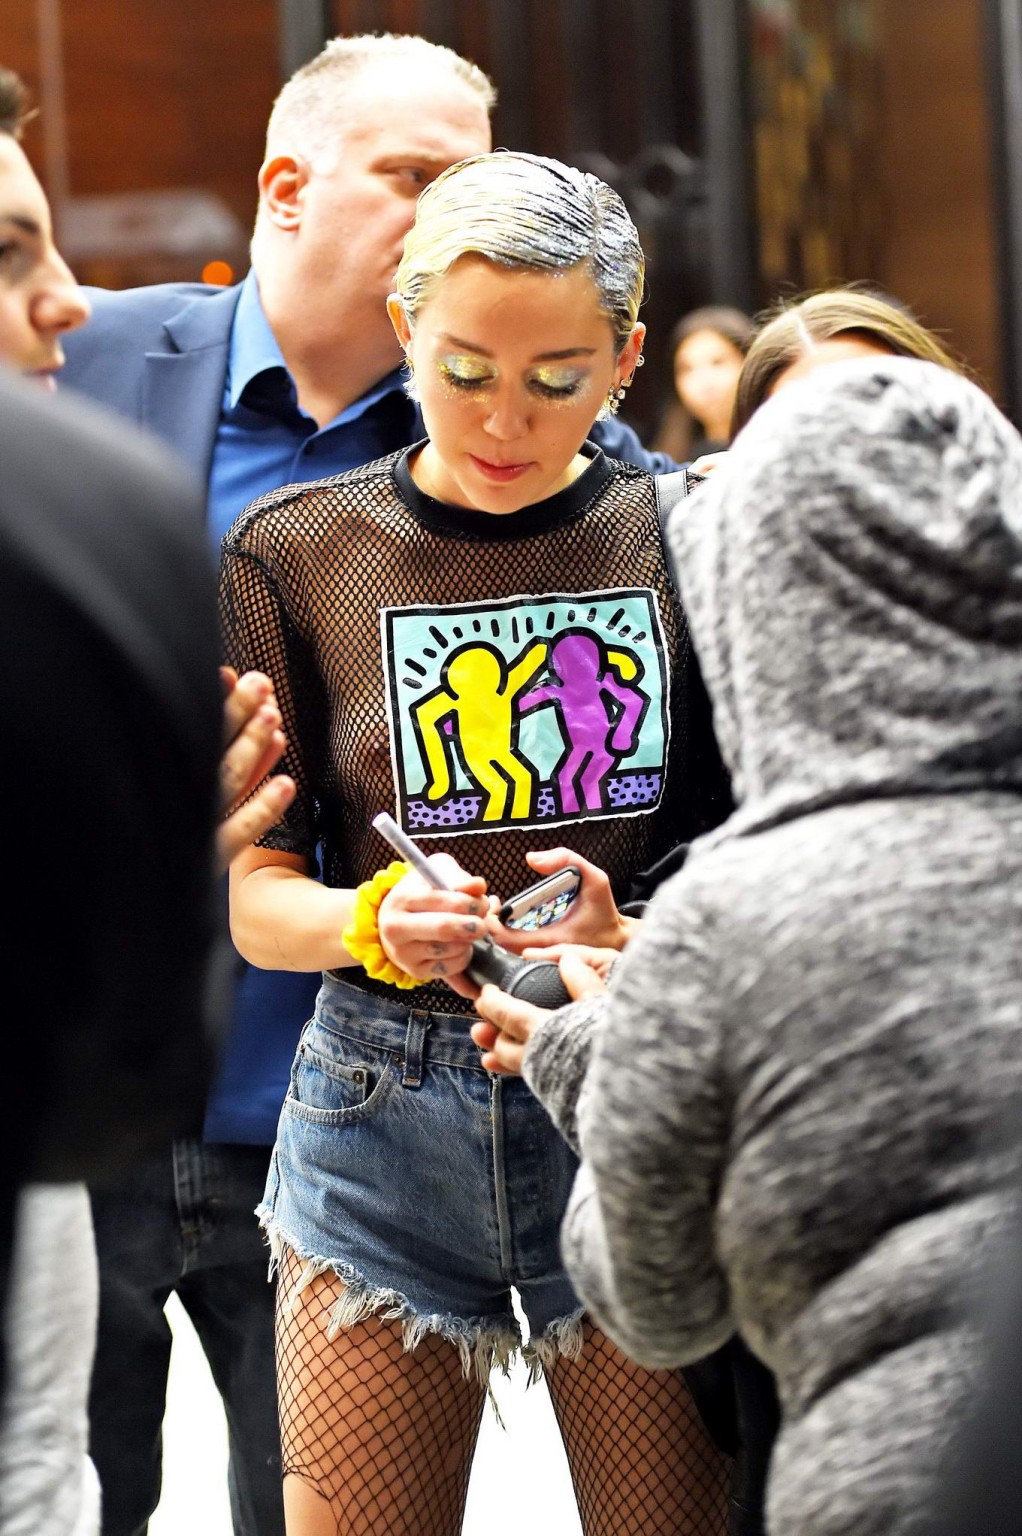 Miley Cyrus shows off her boobs wearing a mesh Tshirt out in NYC #75164243